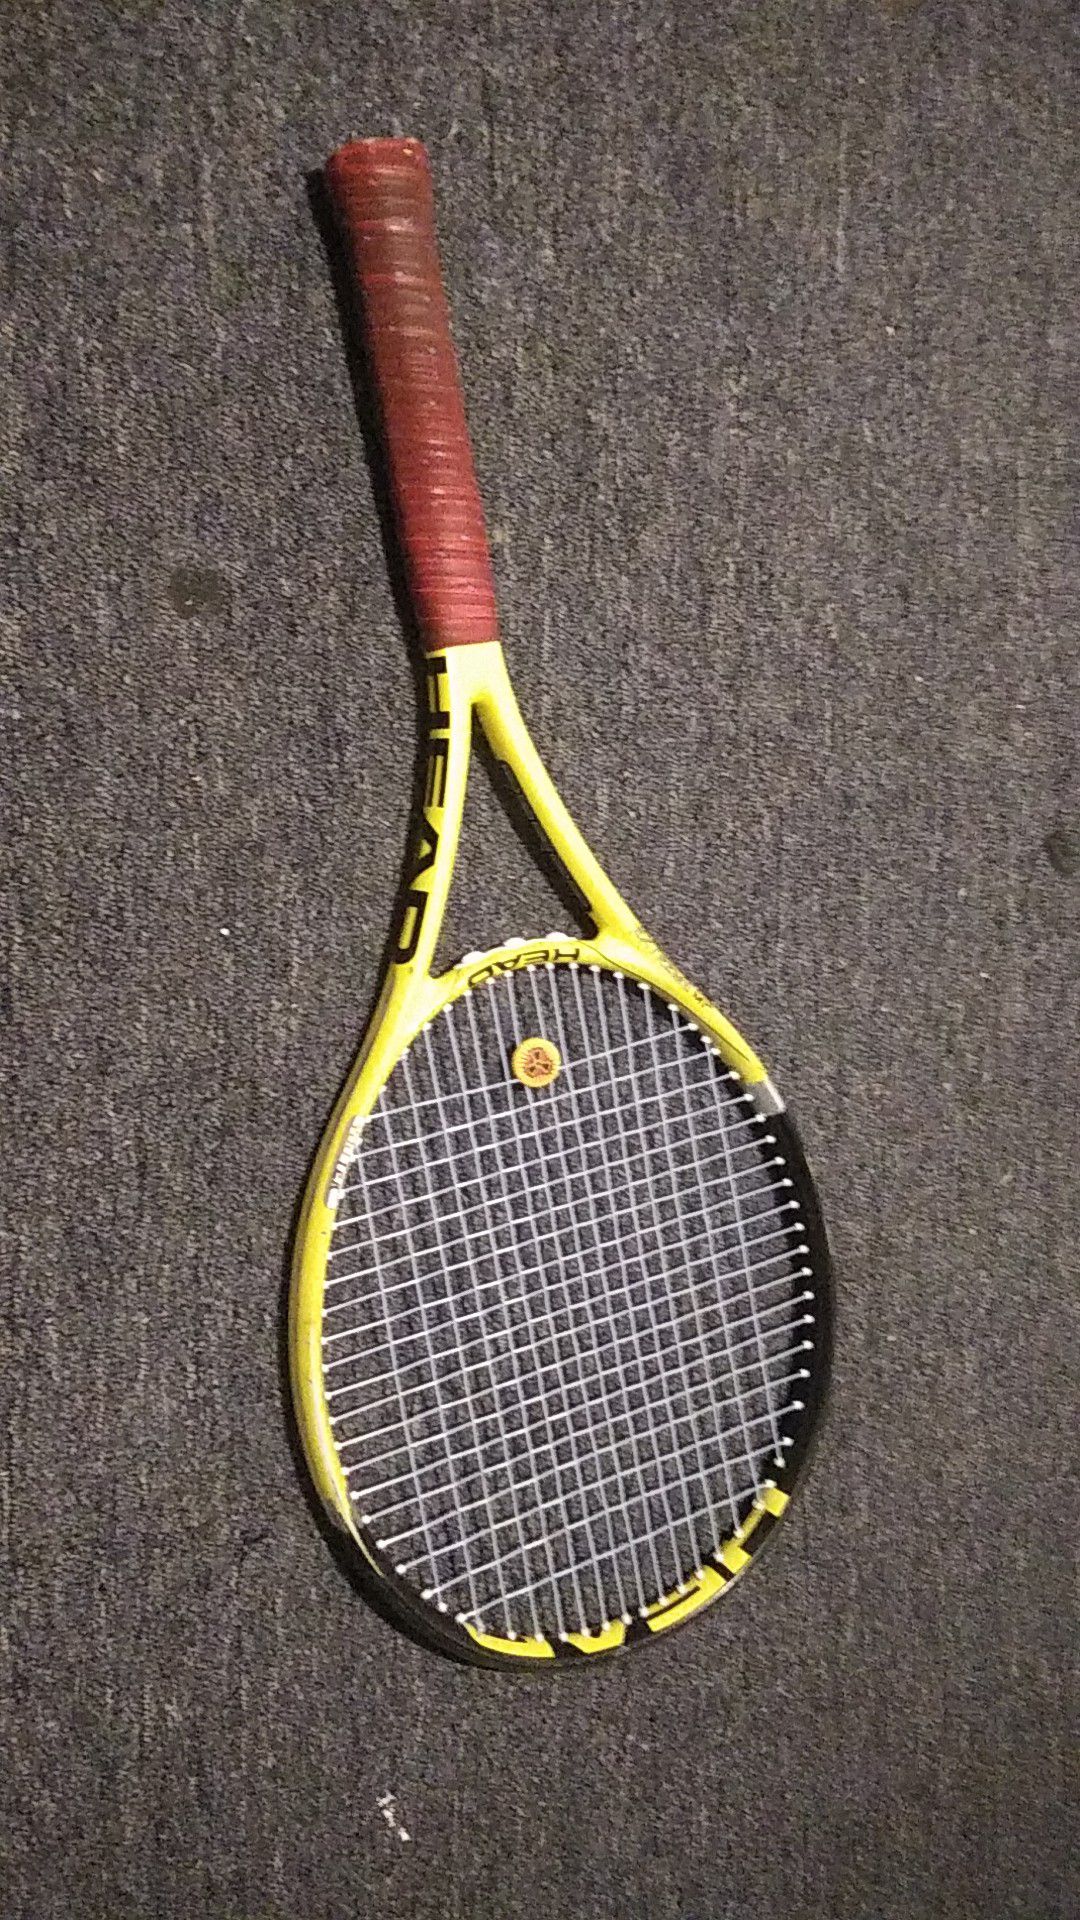 Head Extreme MP tennis racket with suppresor